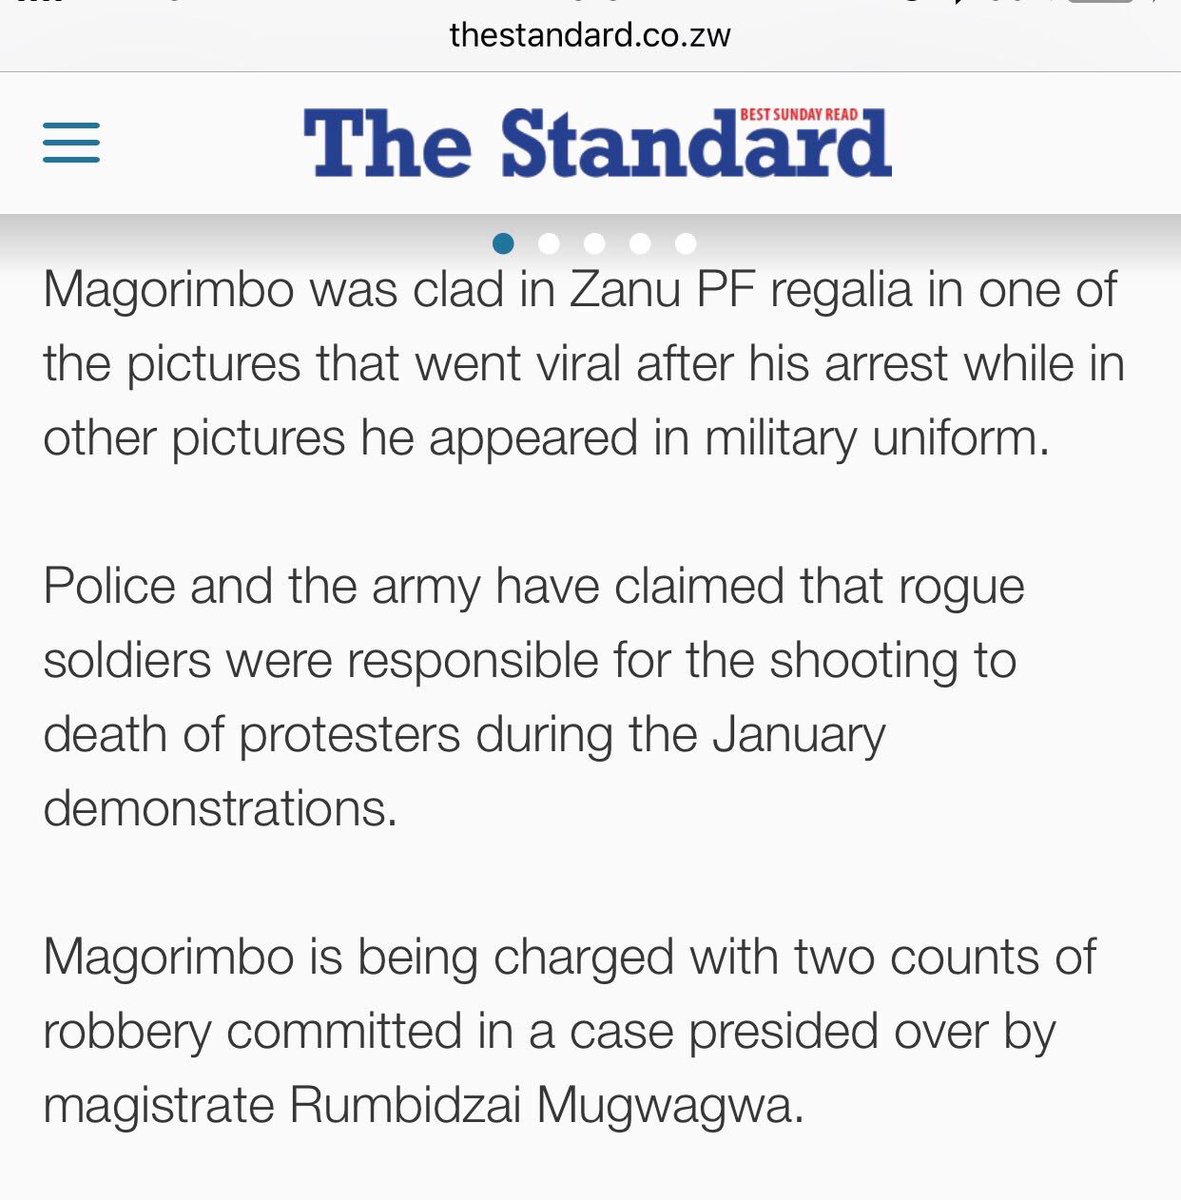 The testimony of Shephard Magorimbo that he was given the military uniform at ZANU PF HQ confirms what we have suspected for some time. That the atrocities in Zimbabwe are being perpetrated by a collective of State agents (army/CIO/police) and ZANU PF militia. #ZimbabweAtrocities